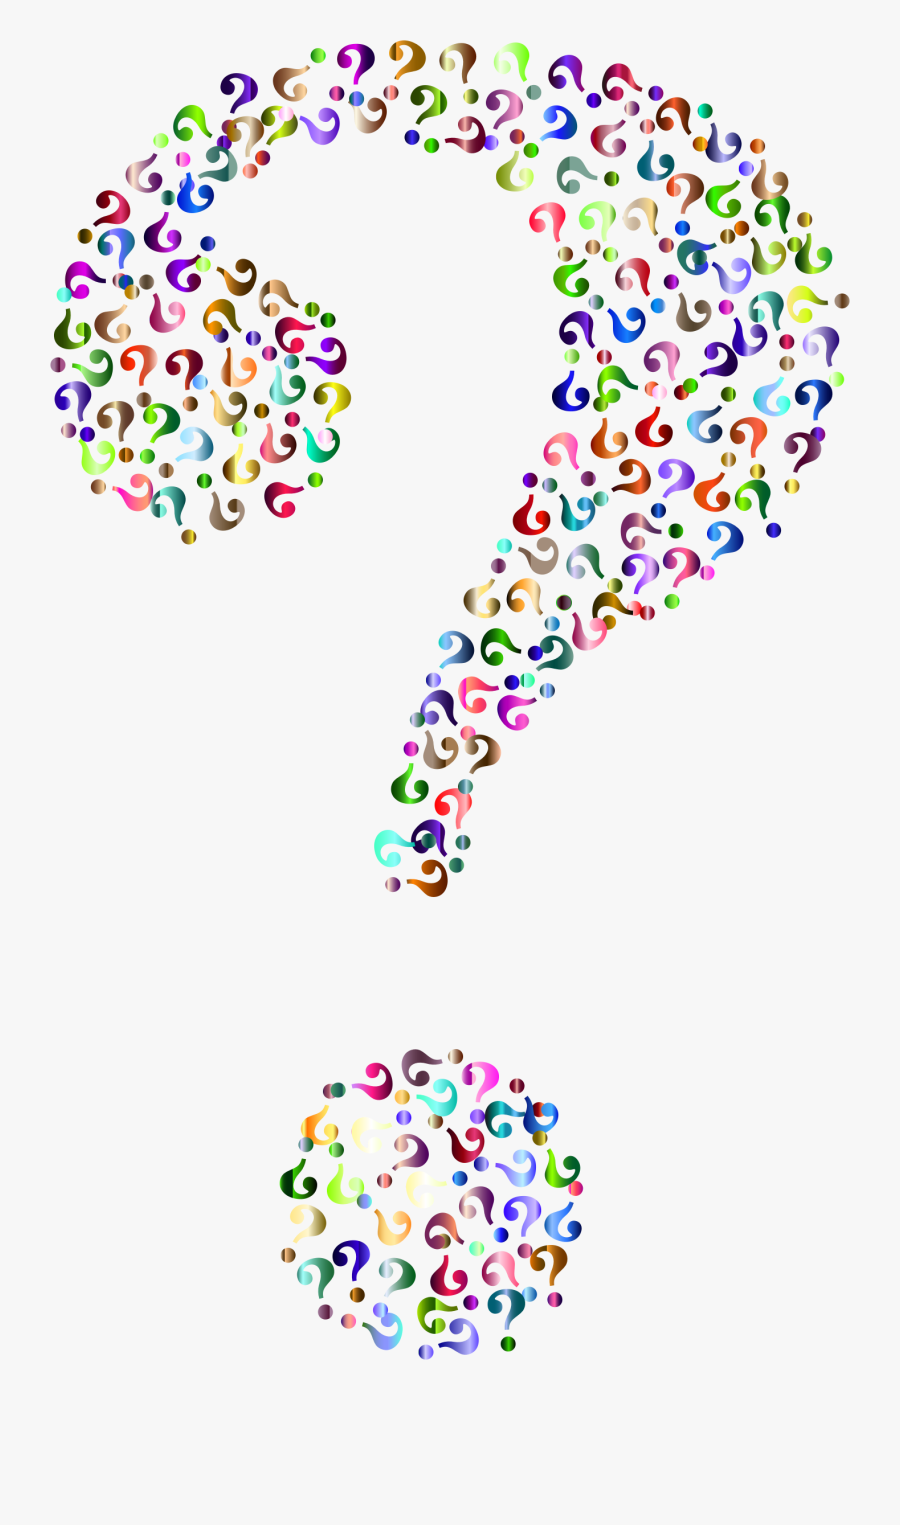 Transparent Question Icon Png - Question Marks With No Background, Transparent Clipart